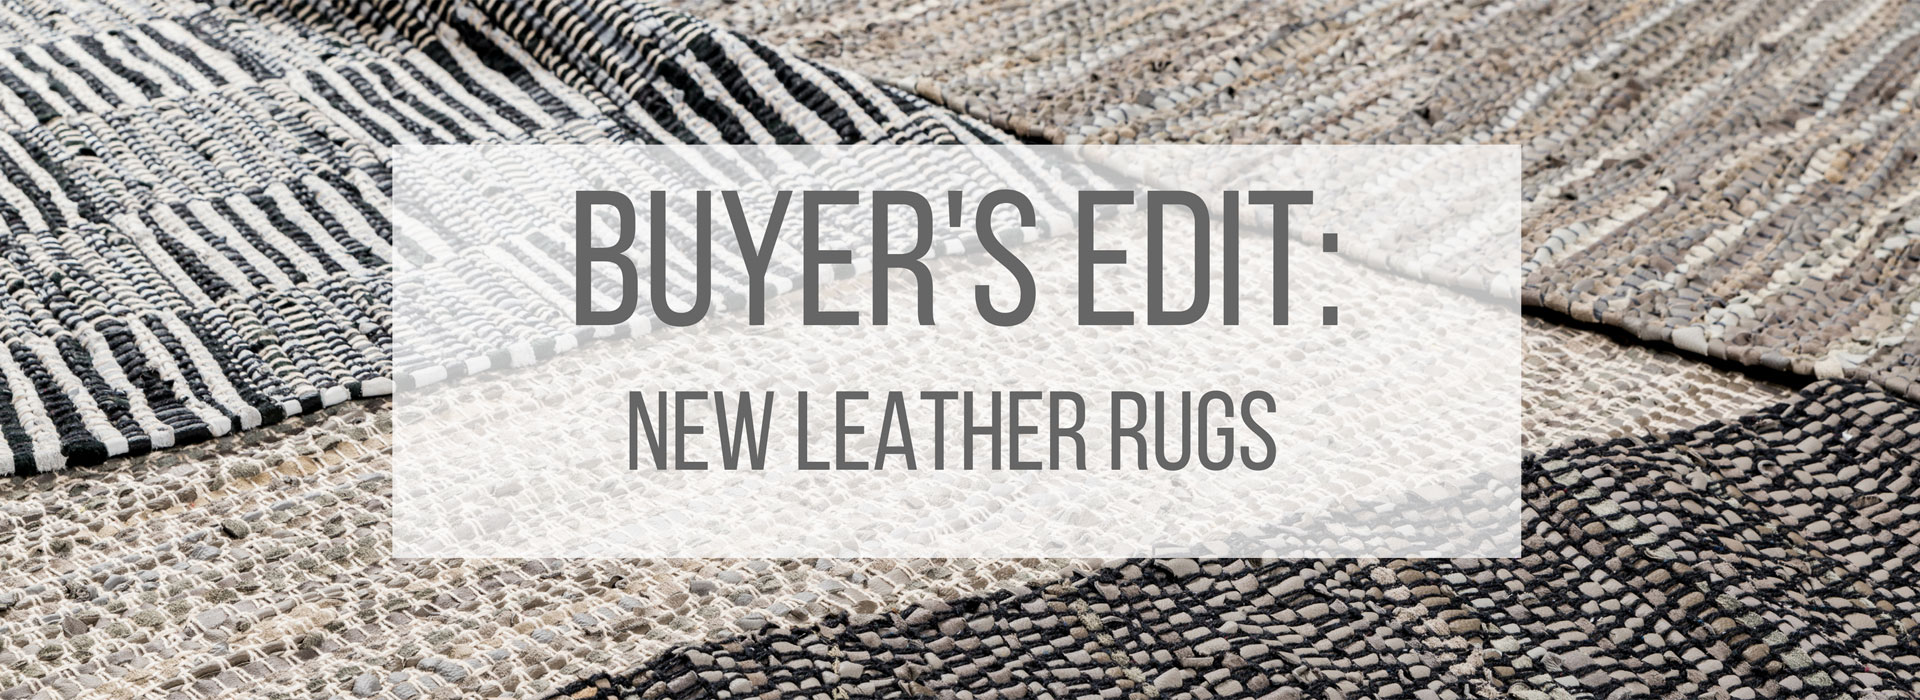 new leather rugs